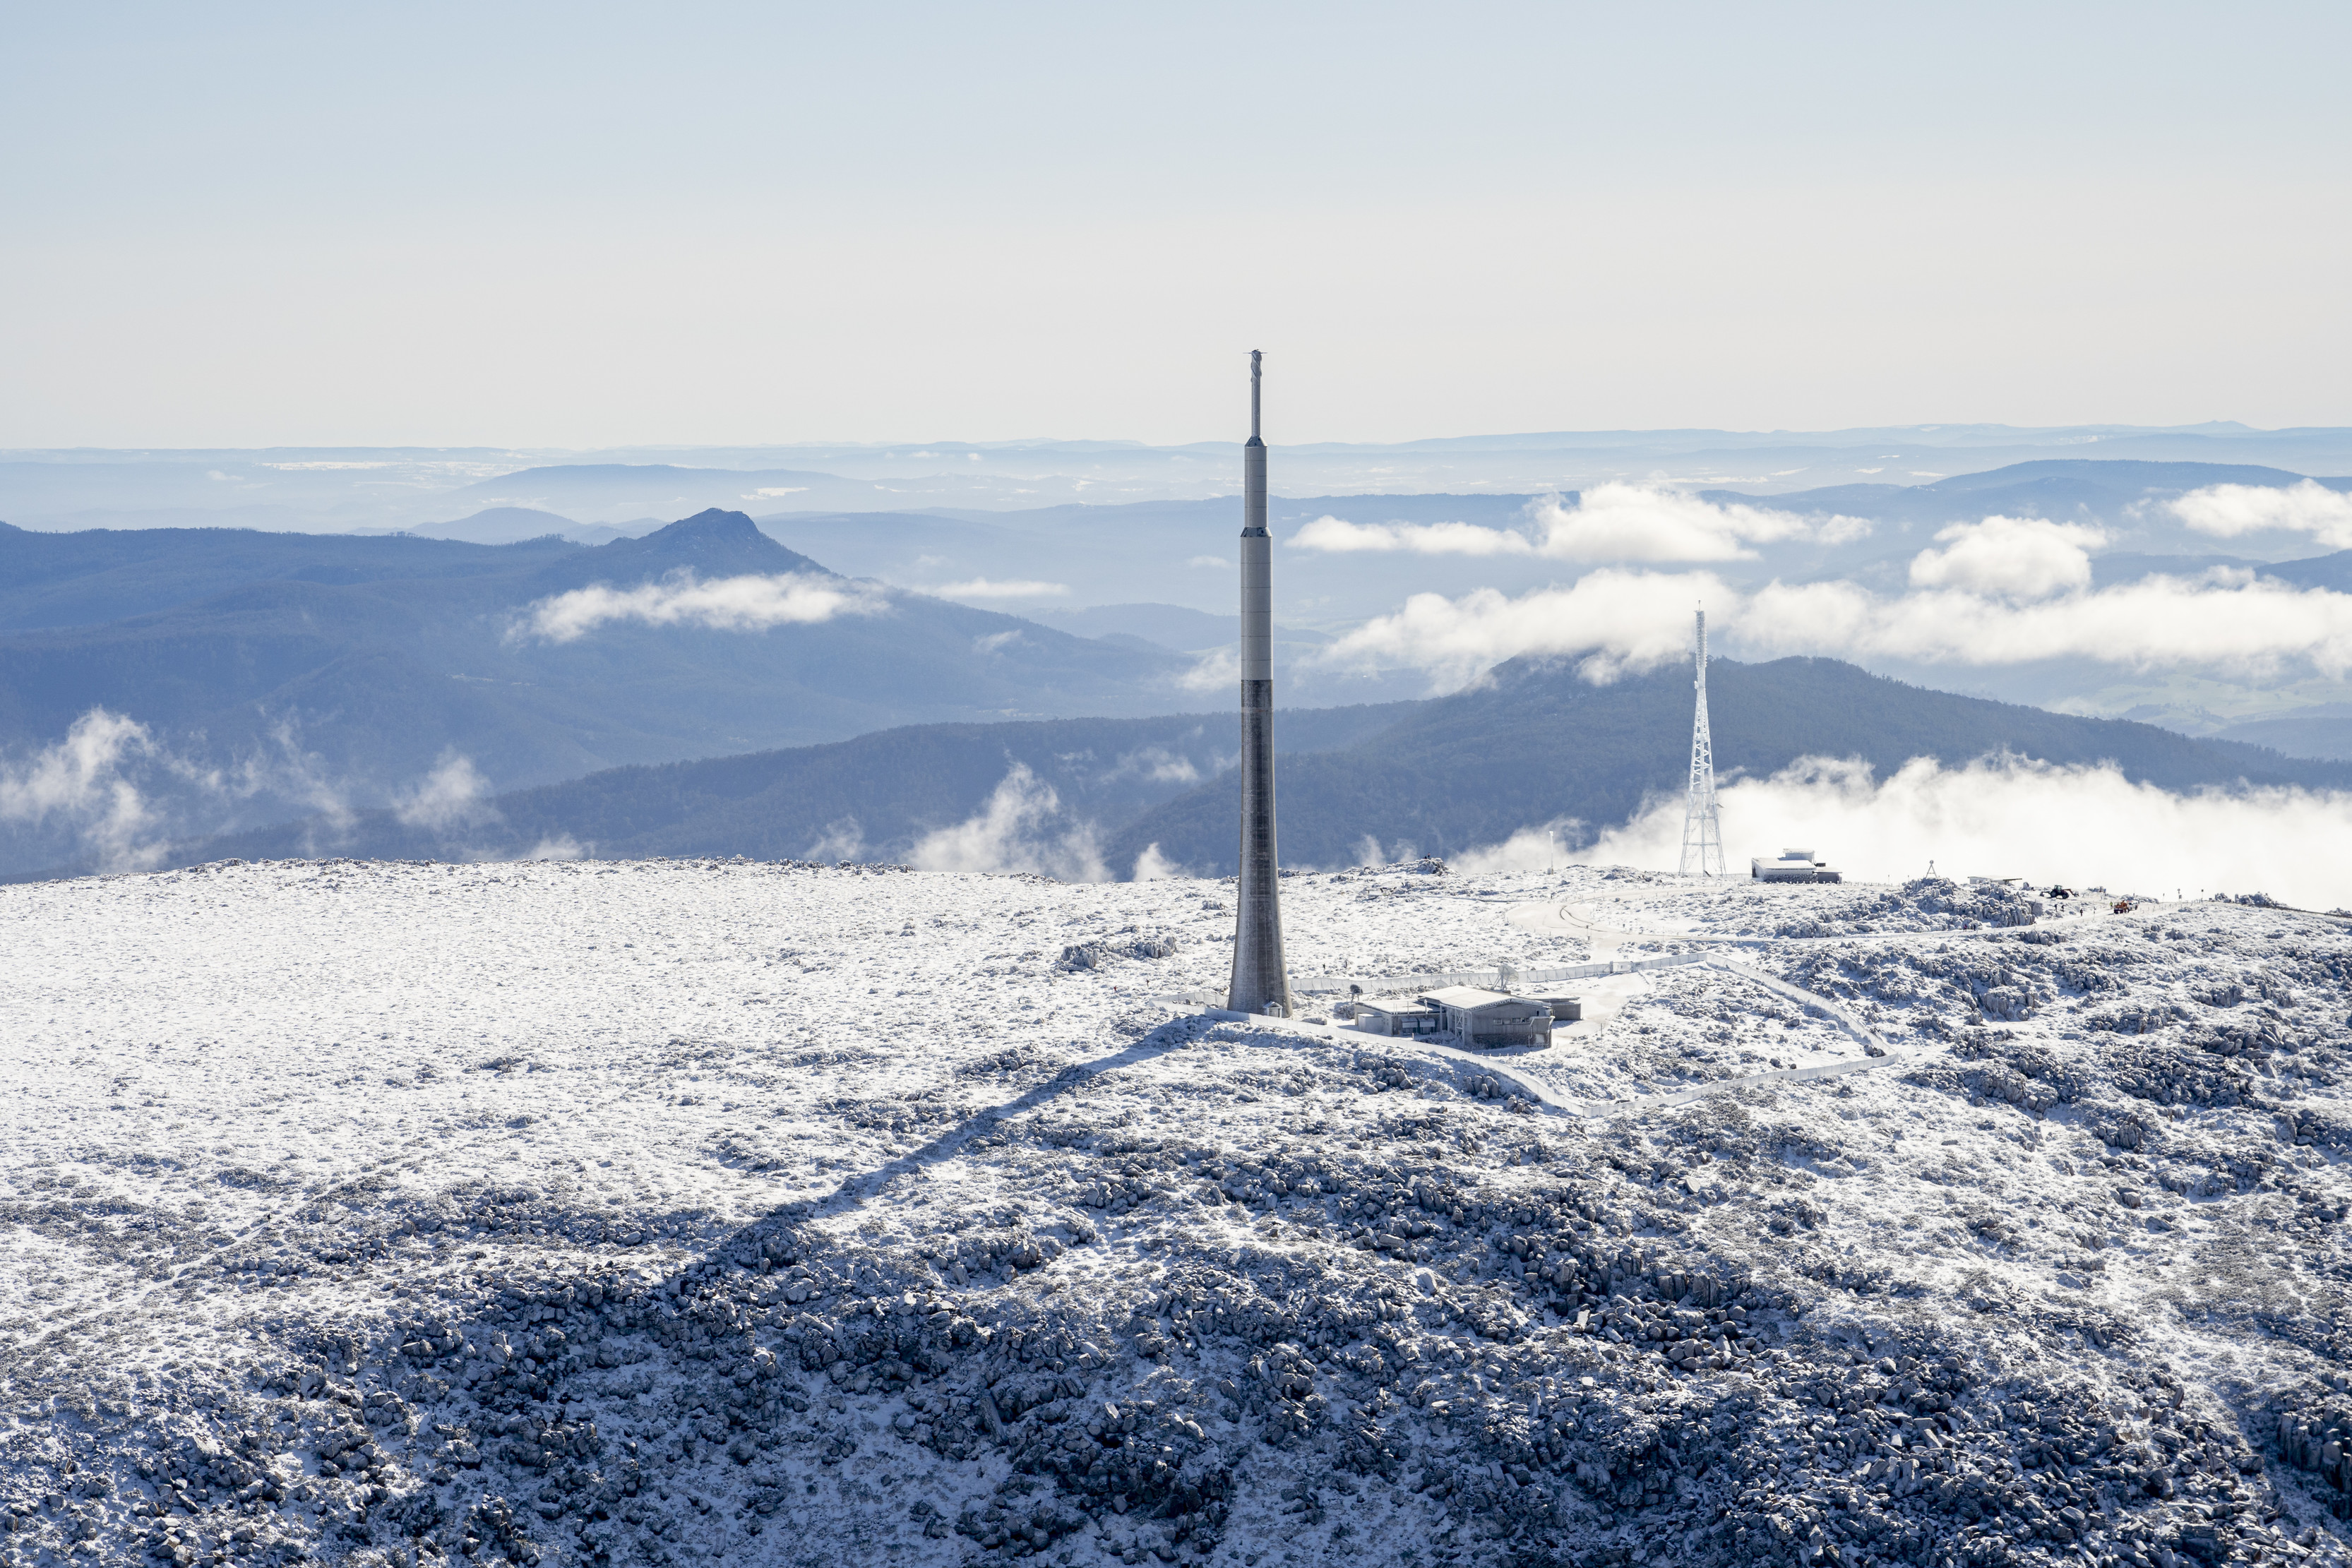 Aerials posted upon the Summit of kunanyi / Mt Wellington, during a cool, winter's day.